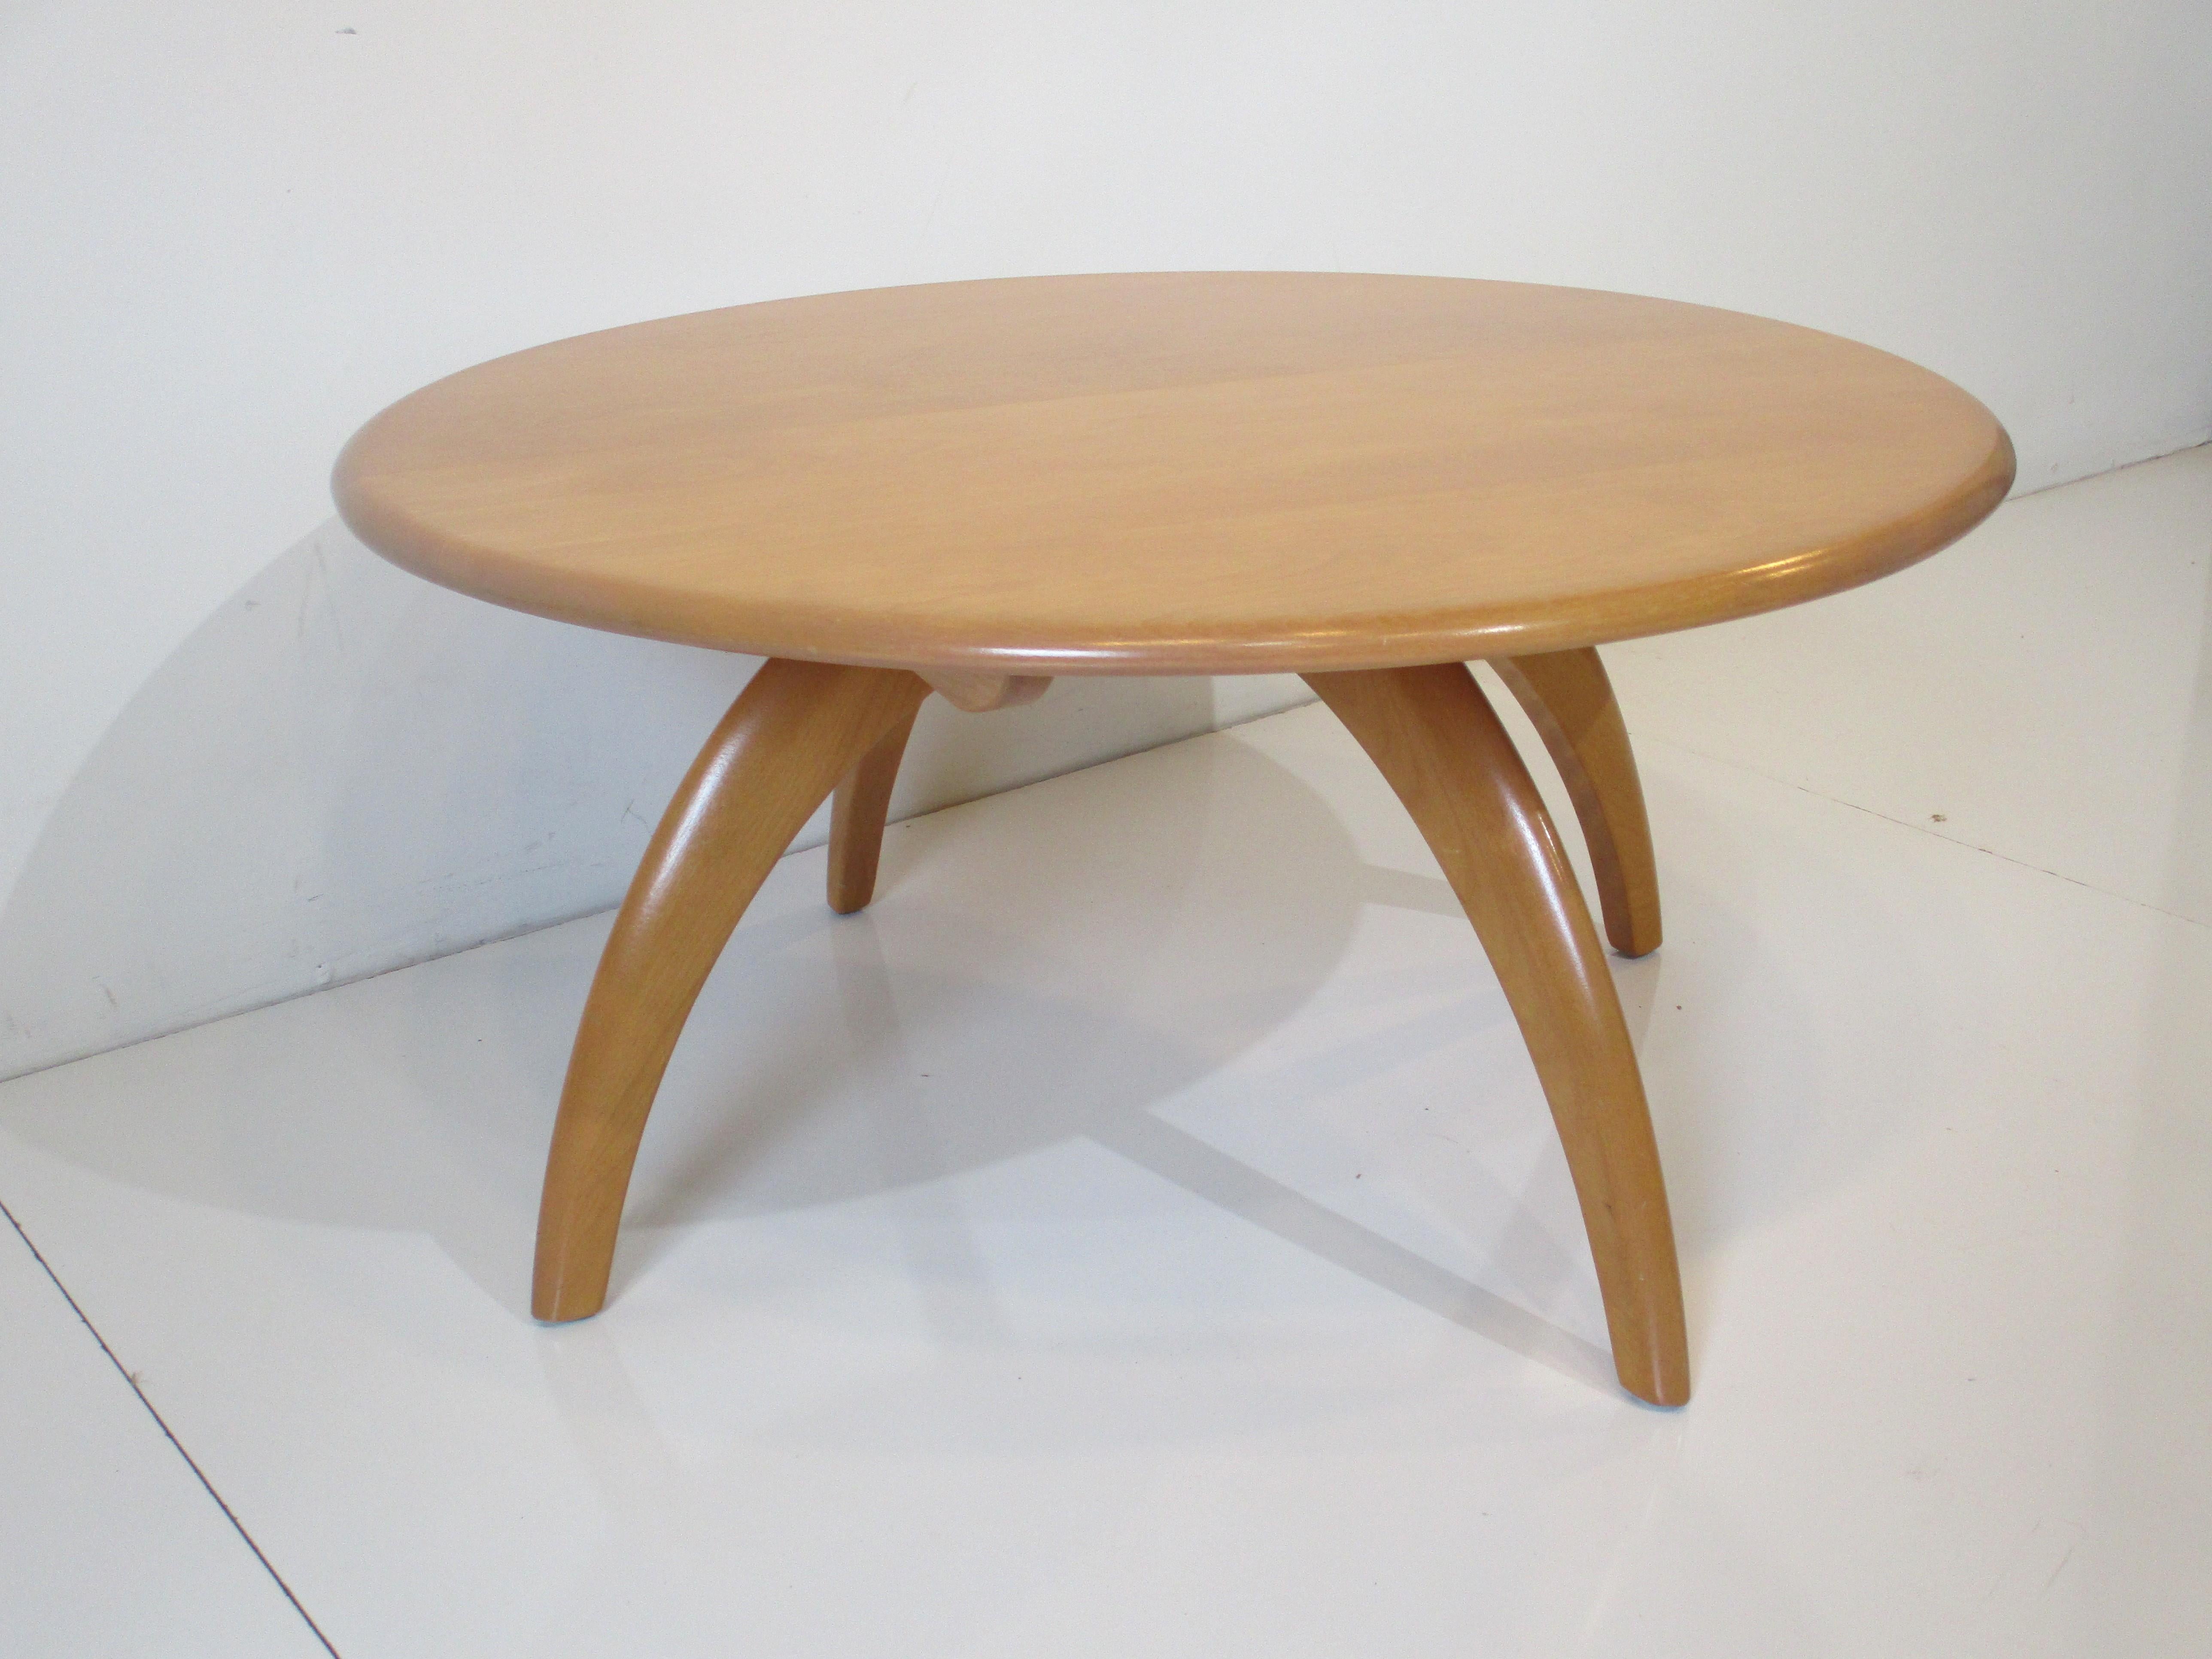 A solid maple wood round coffee table with revolving top in the champagne finish with sculptural curved legs. A timeless design of simplicity and function by Leo Jiranek and Ernest Herrmann for the Heywood Wakefield furniture company model # M306G